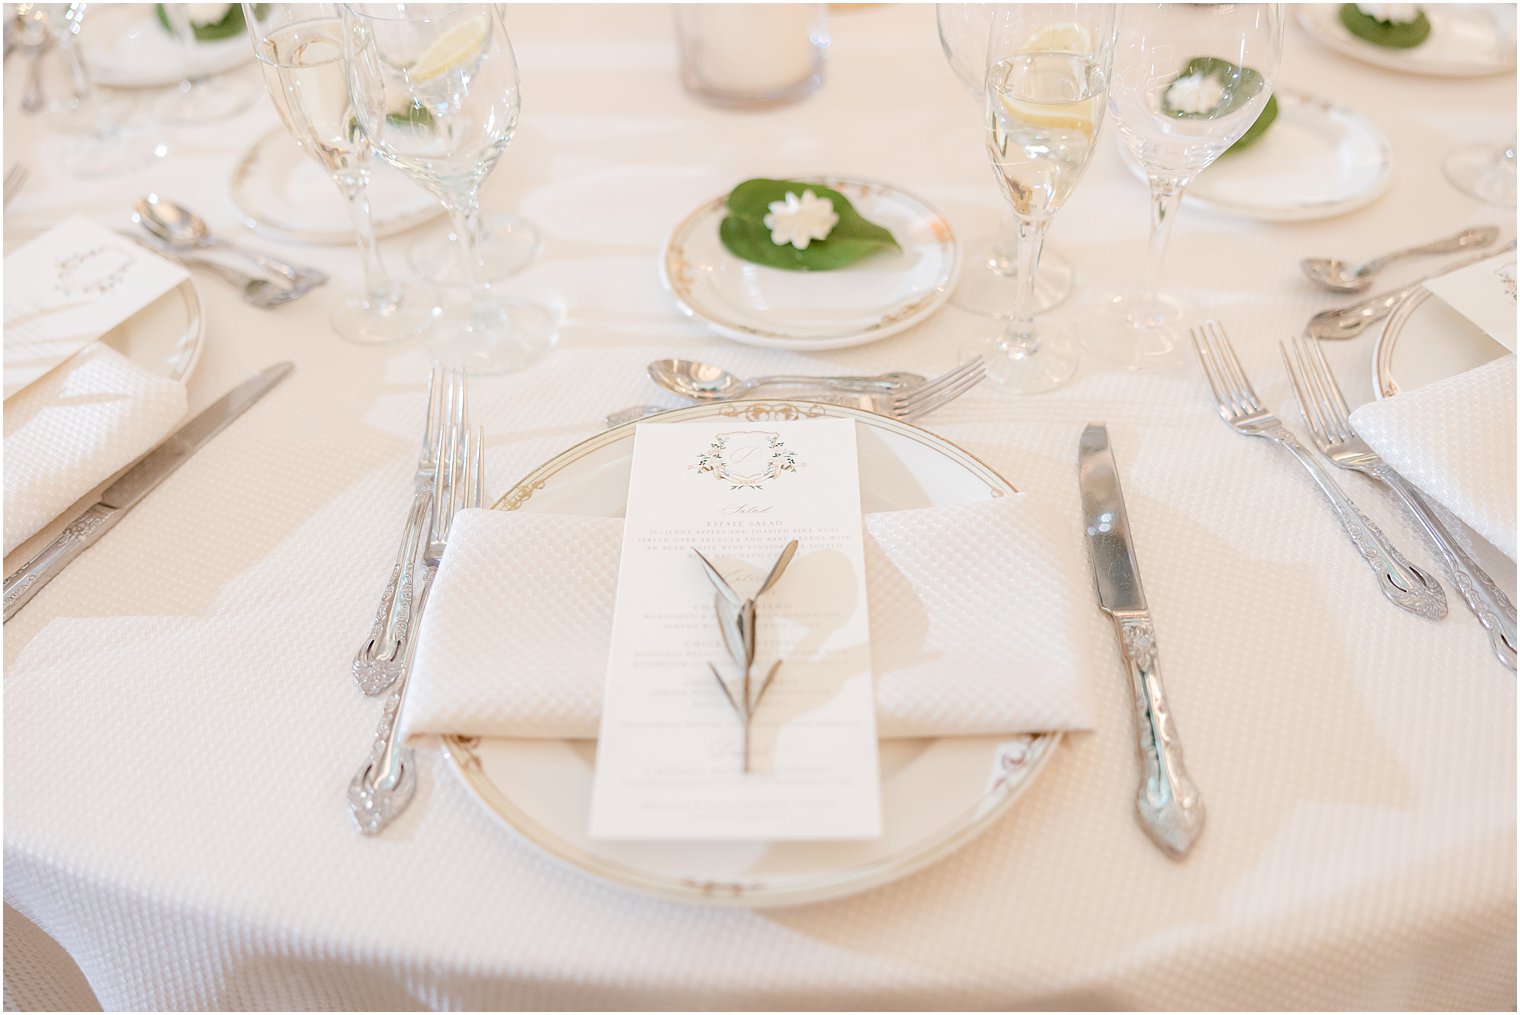 white plate with silverware and green sprig on napkin